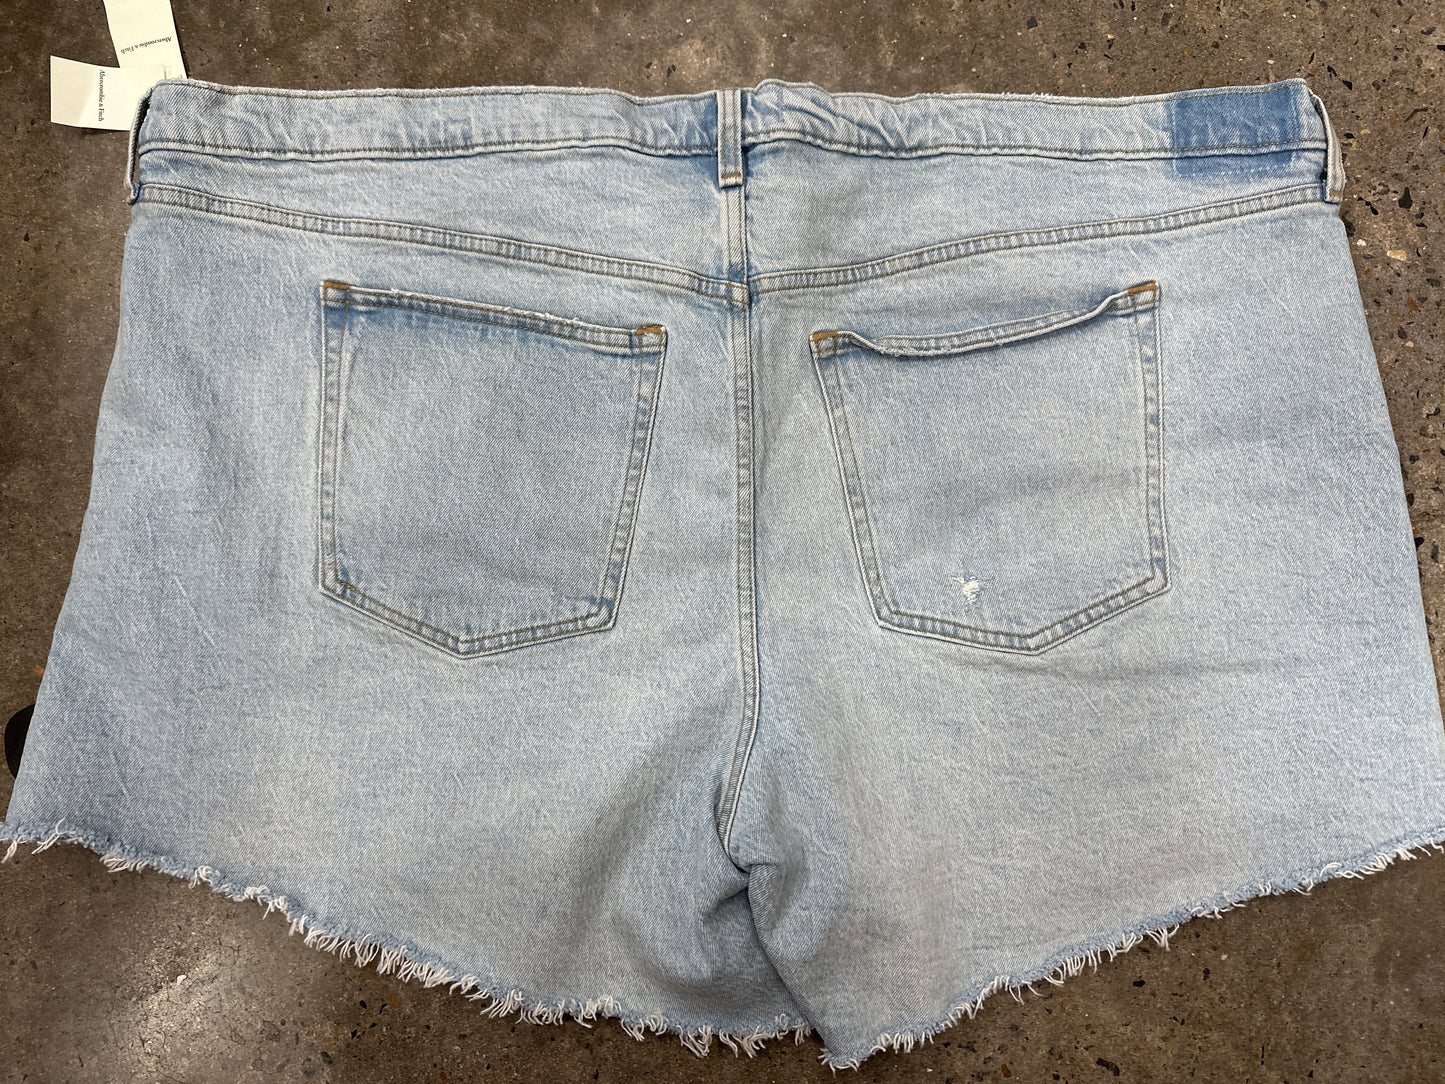 Shorts By Abercrombie And Fitch  Size: 24